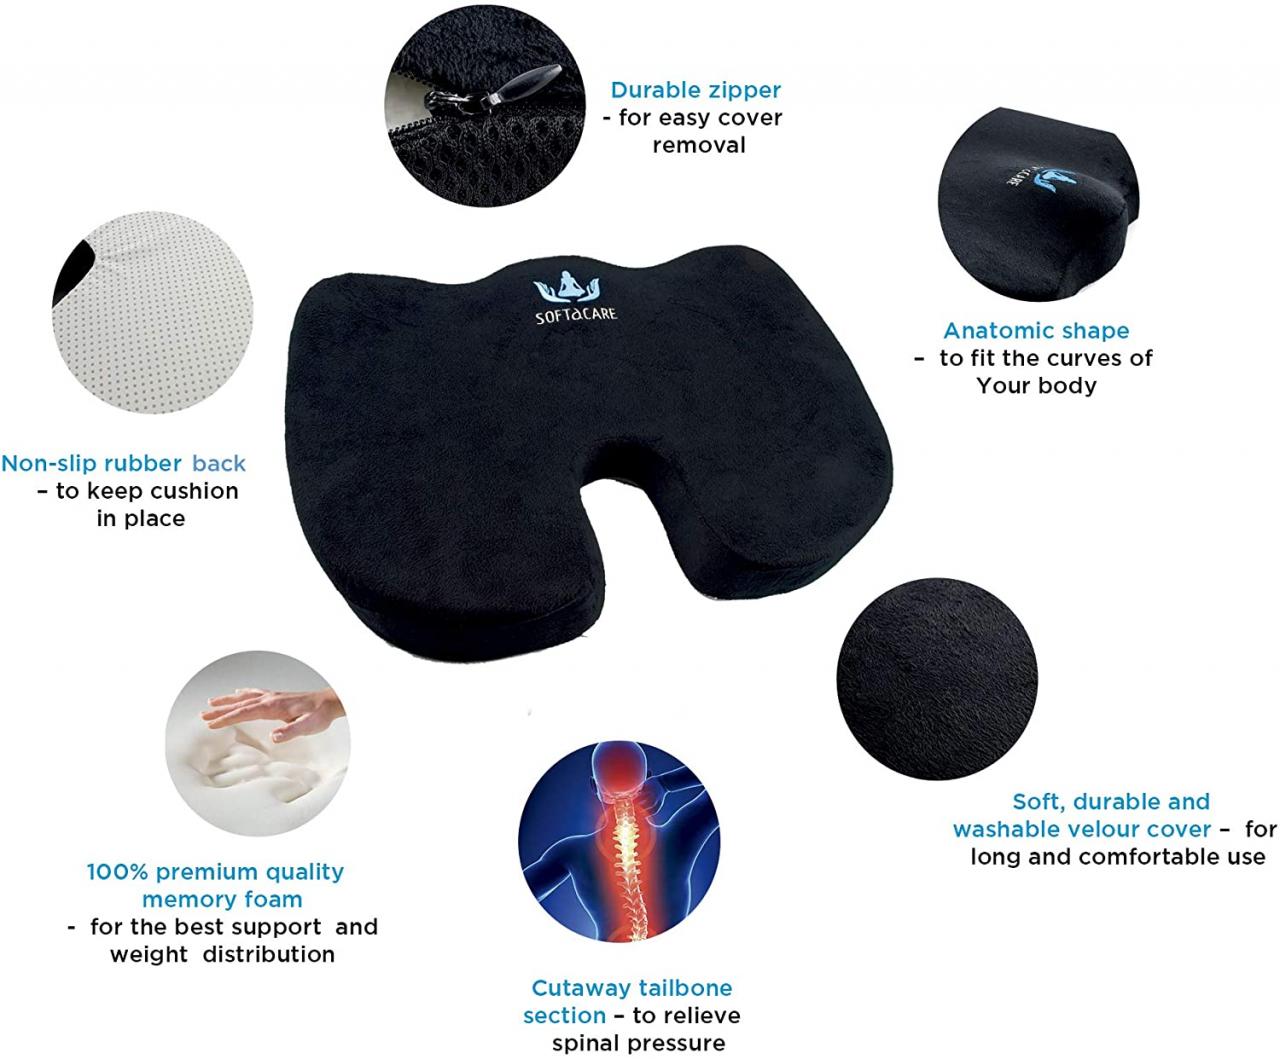 Buy SOFTaCARE Seat Cushion Coccyx Orthopedic Memory Foam and Lumbar Support  Pillow, Set of 2 (Black, 2 pcs) Online in Hong Kong. B07P9RRYWL